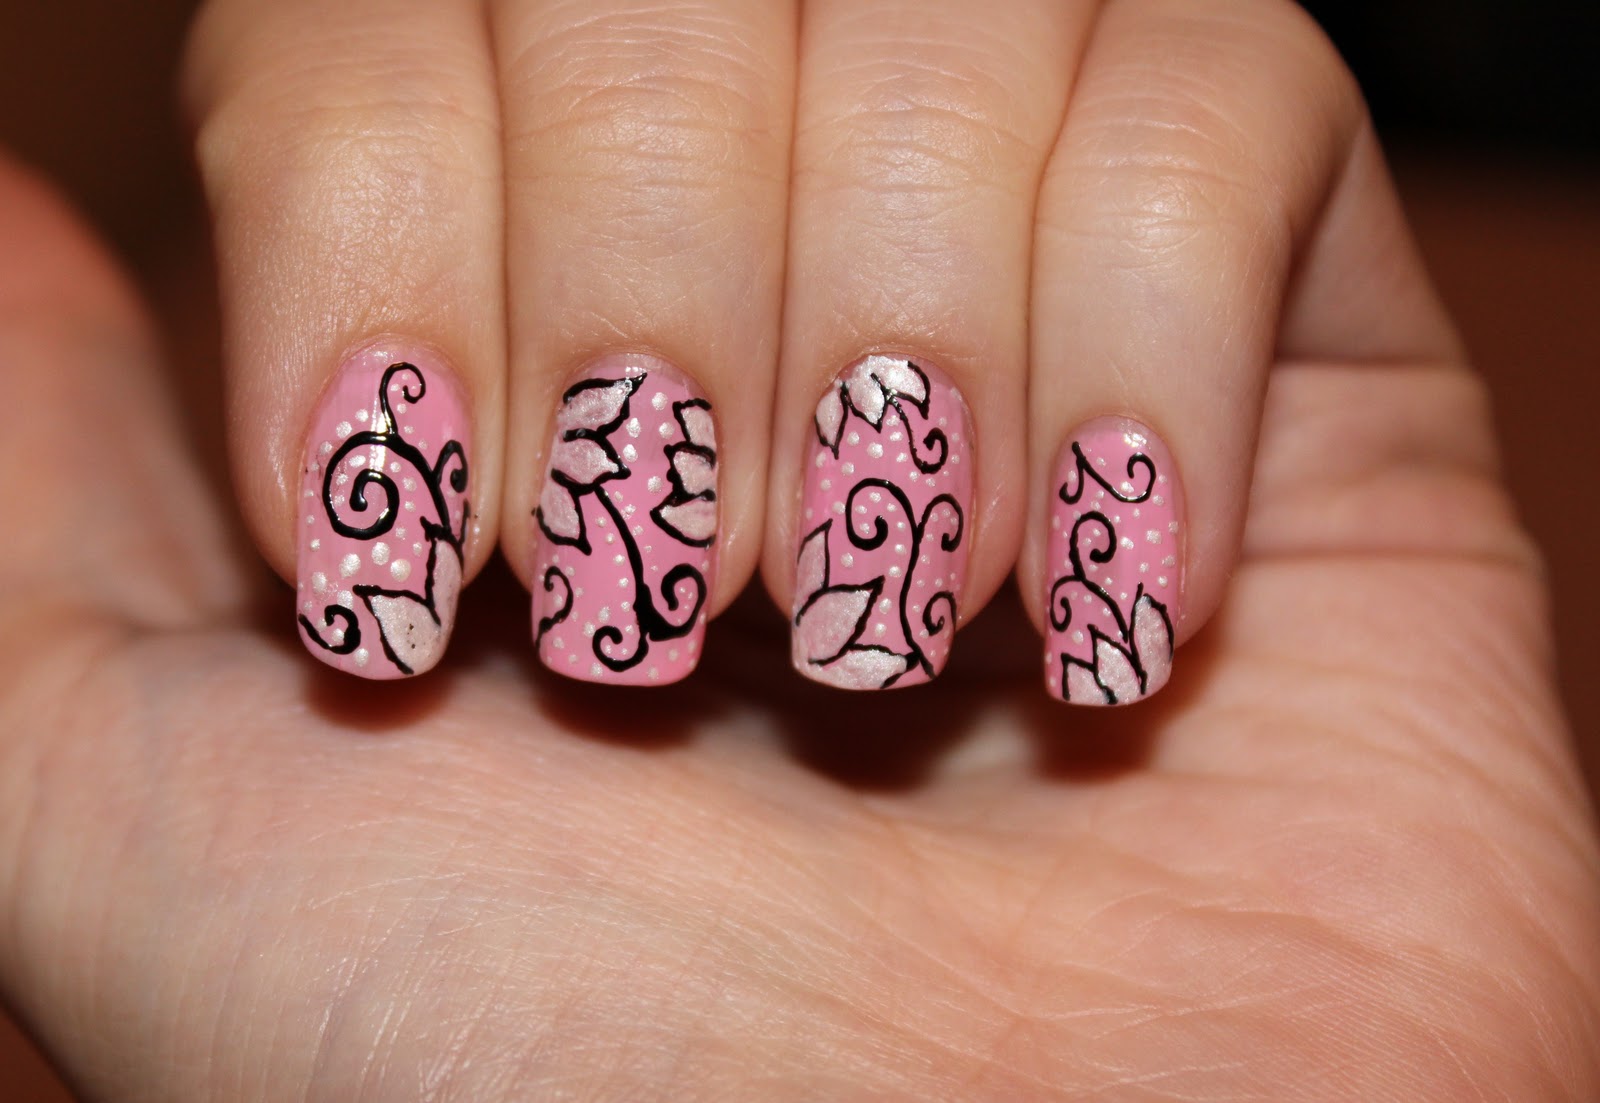 8. "Nail Art Videos and Tutorials" Facebook group - wide 9